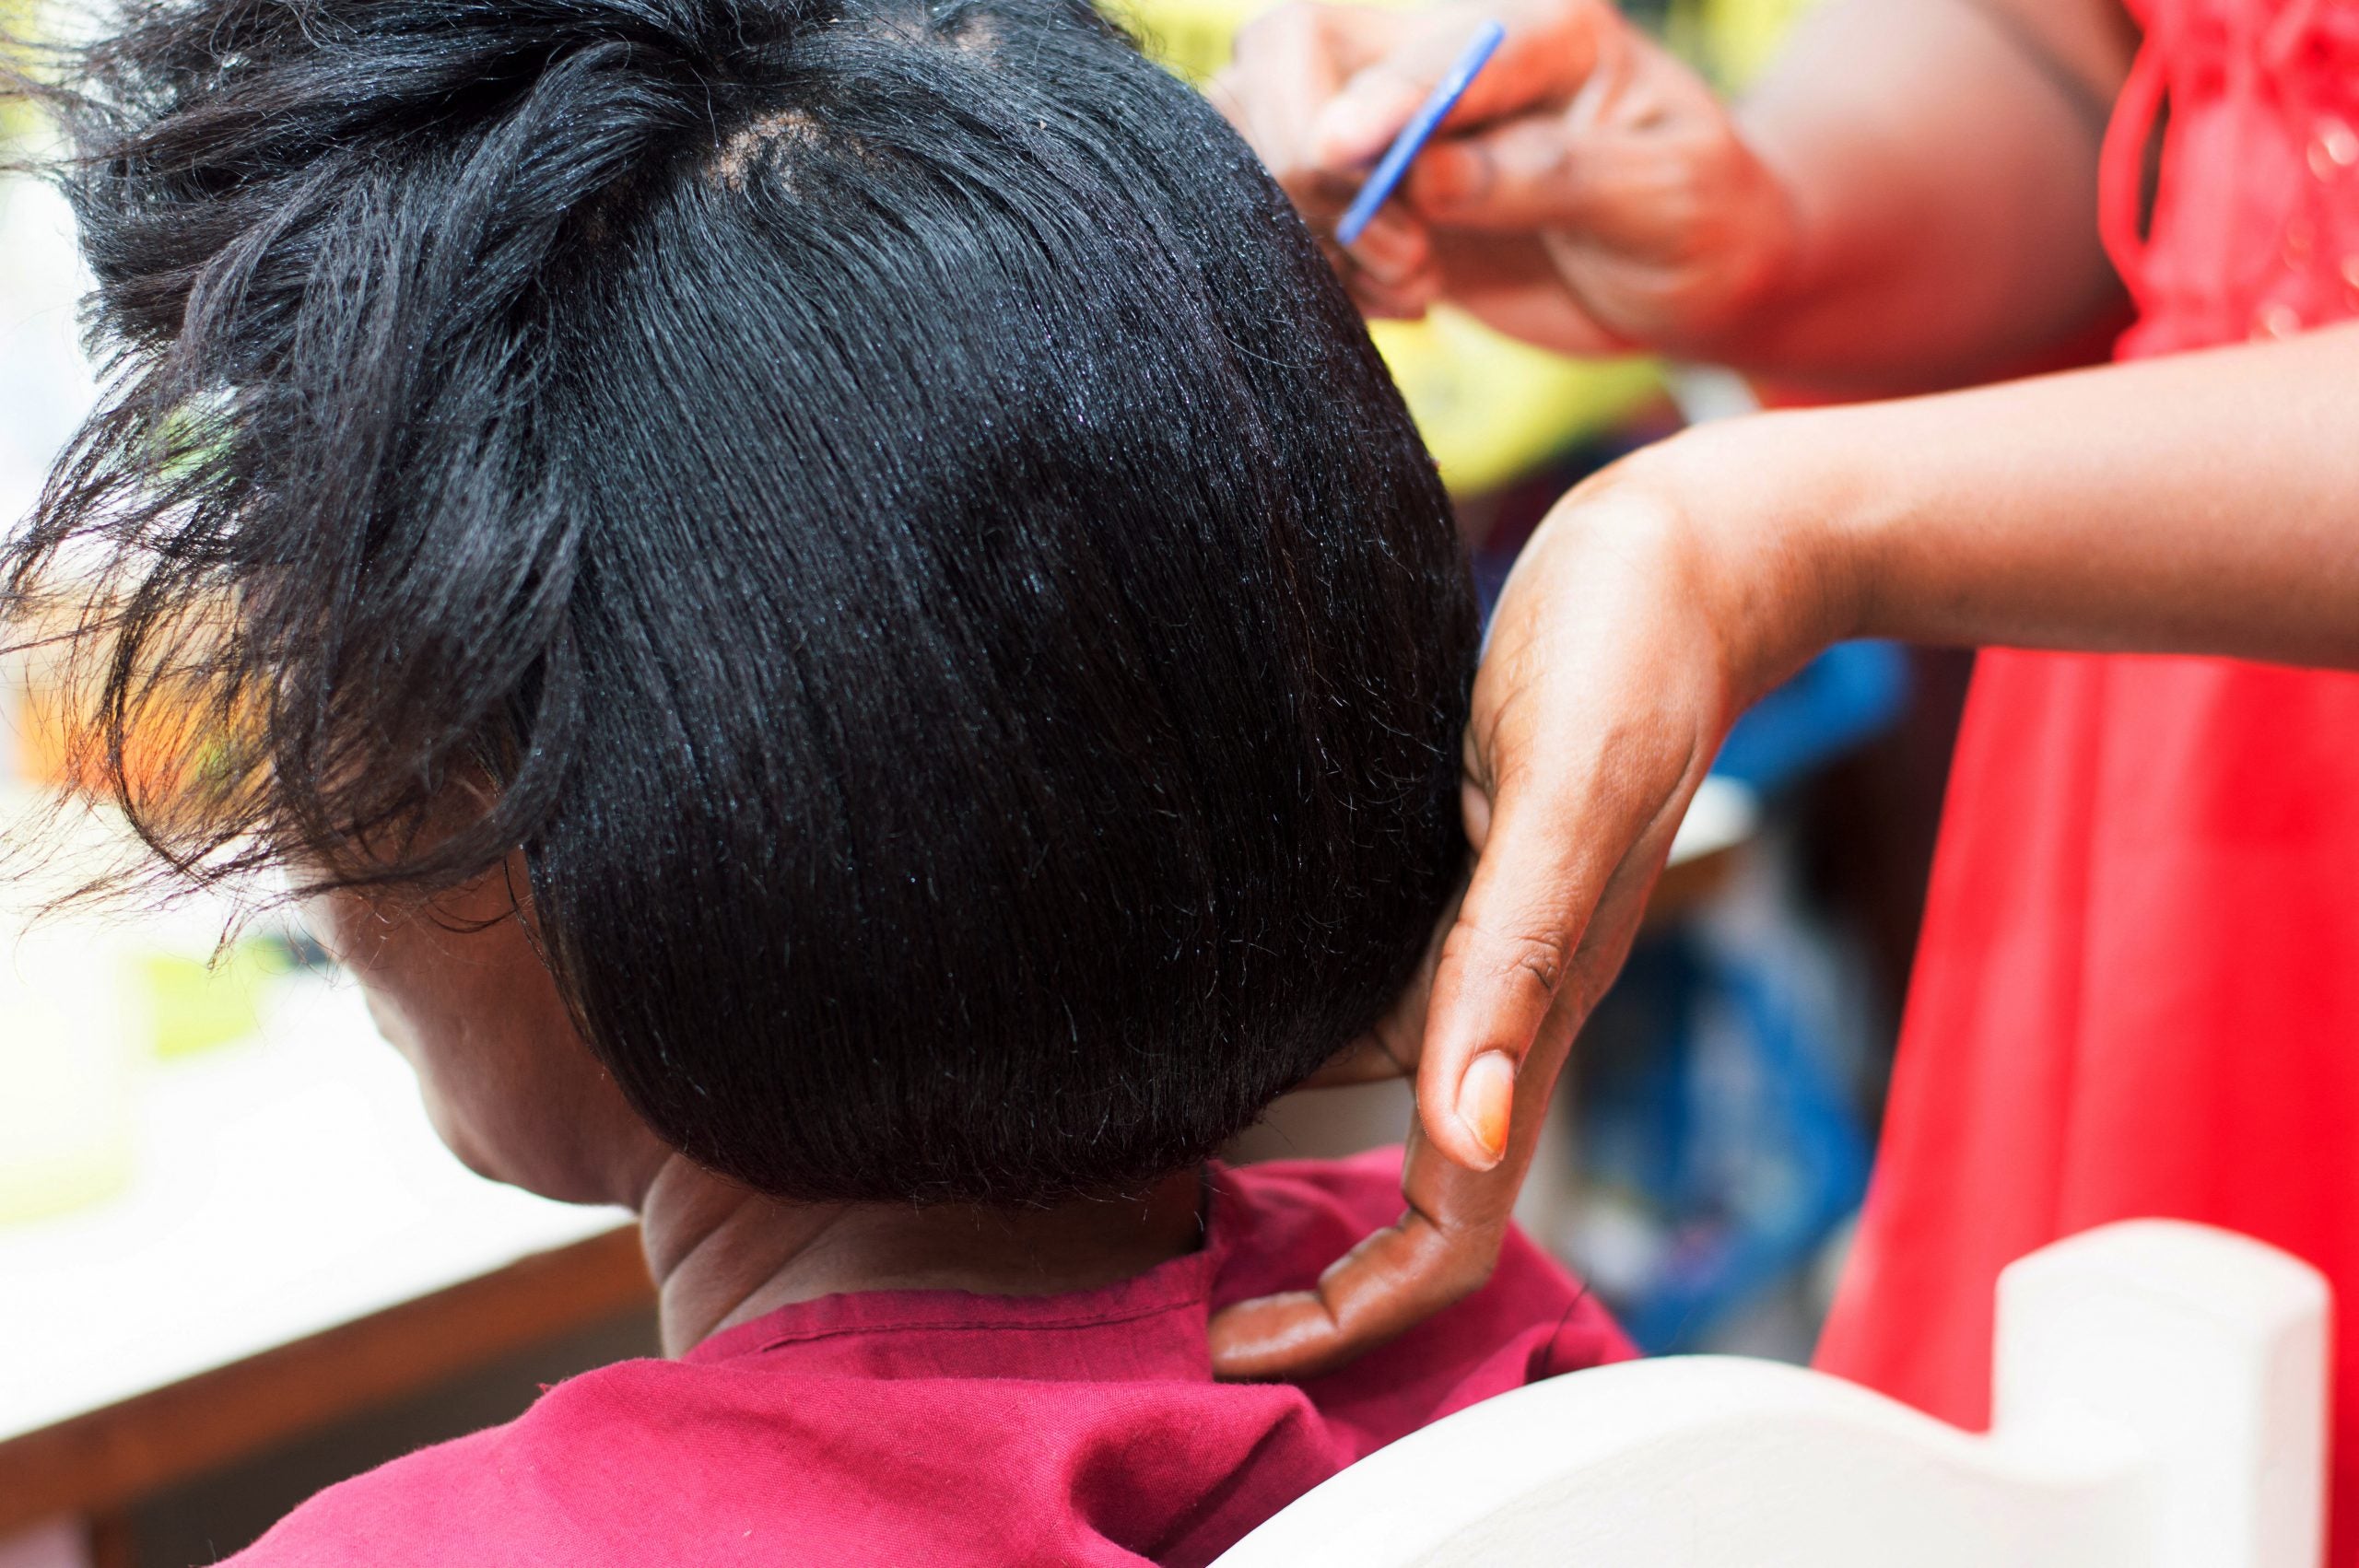 Study of Black Women Links Frequent Use of Lye-based Hair Relaxers to Breast Cancer